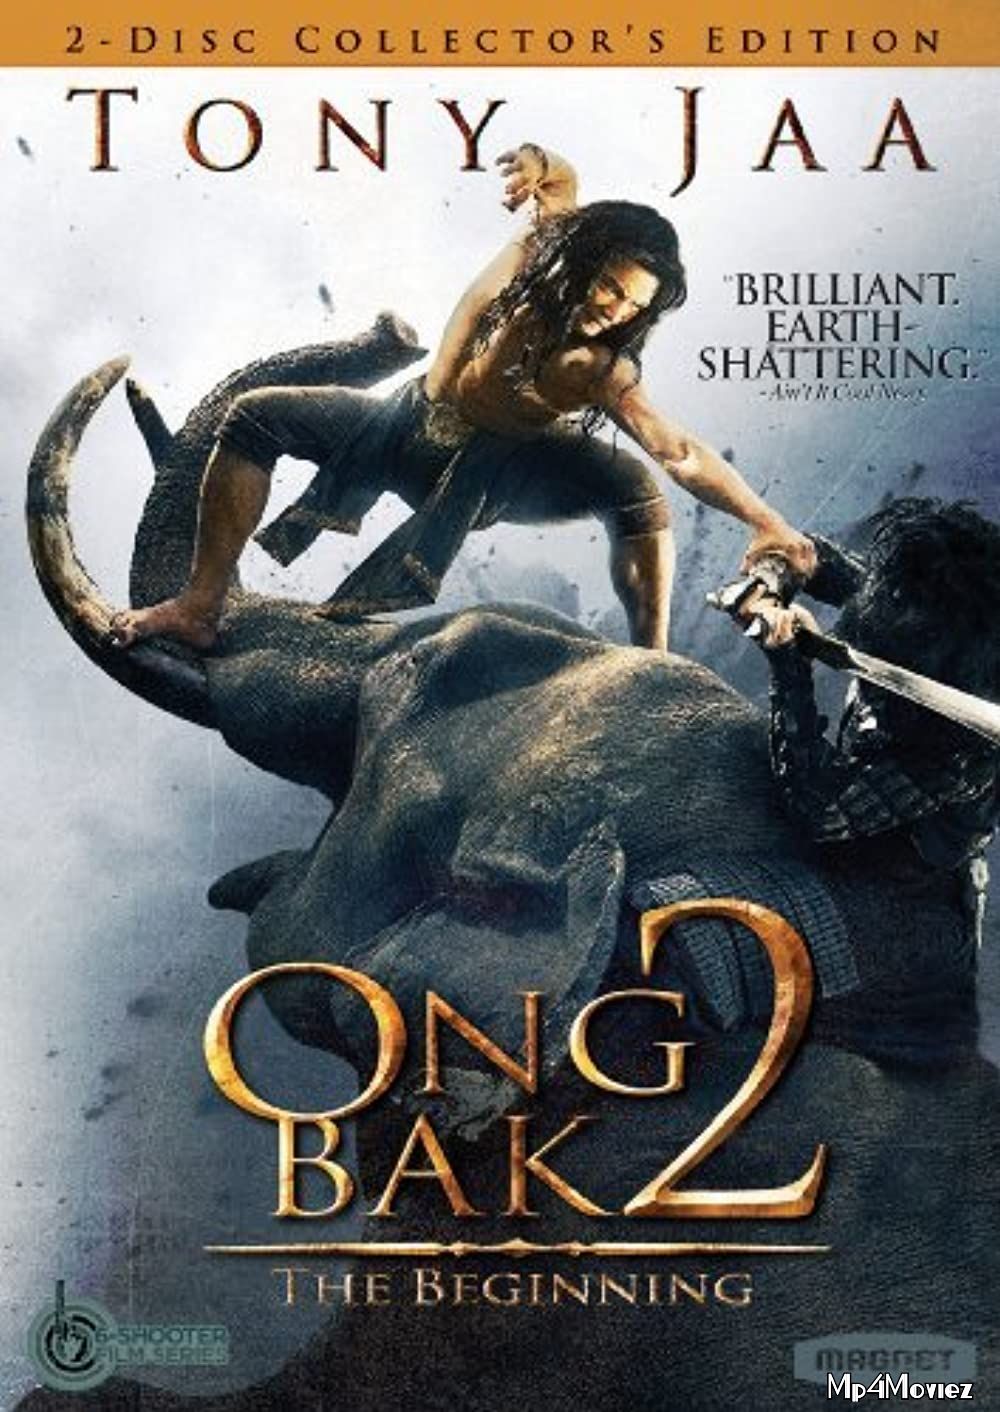 Ong Bak 2 The Beginning (2008) Hindi Dubbed BluRay download full movie